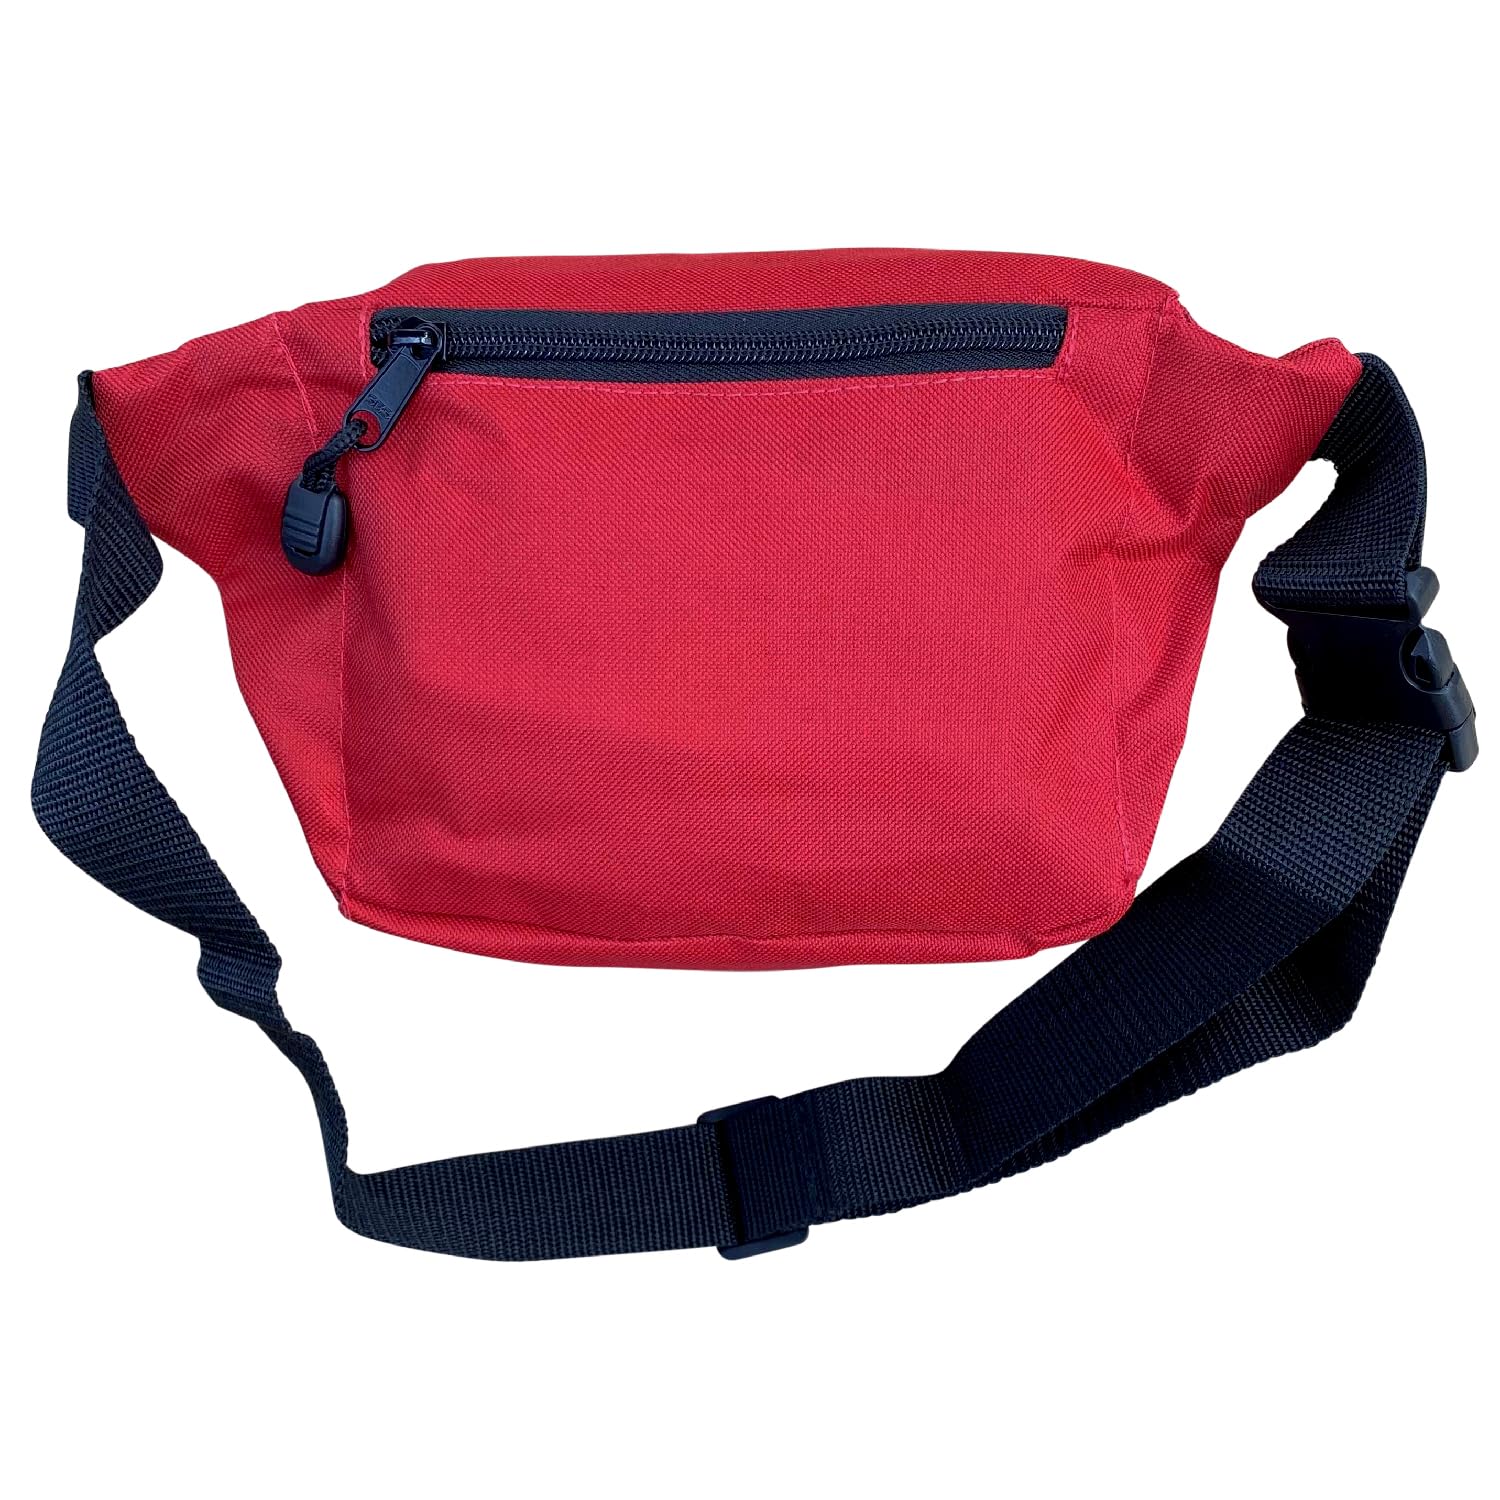 Kemp USA Lifeguard Fanny/Hip Pack with GUARD Logo, Water Resistant & Durable, Red